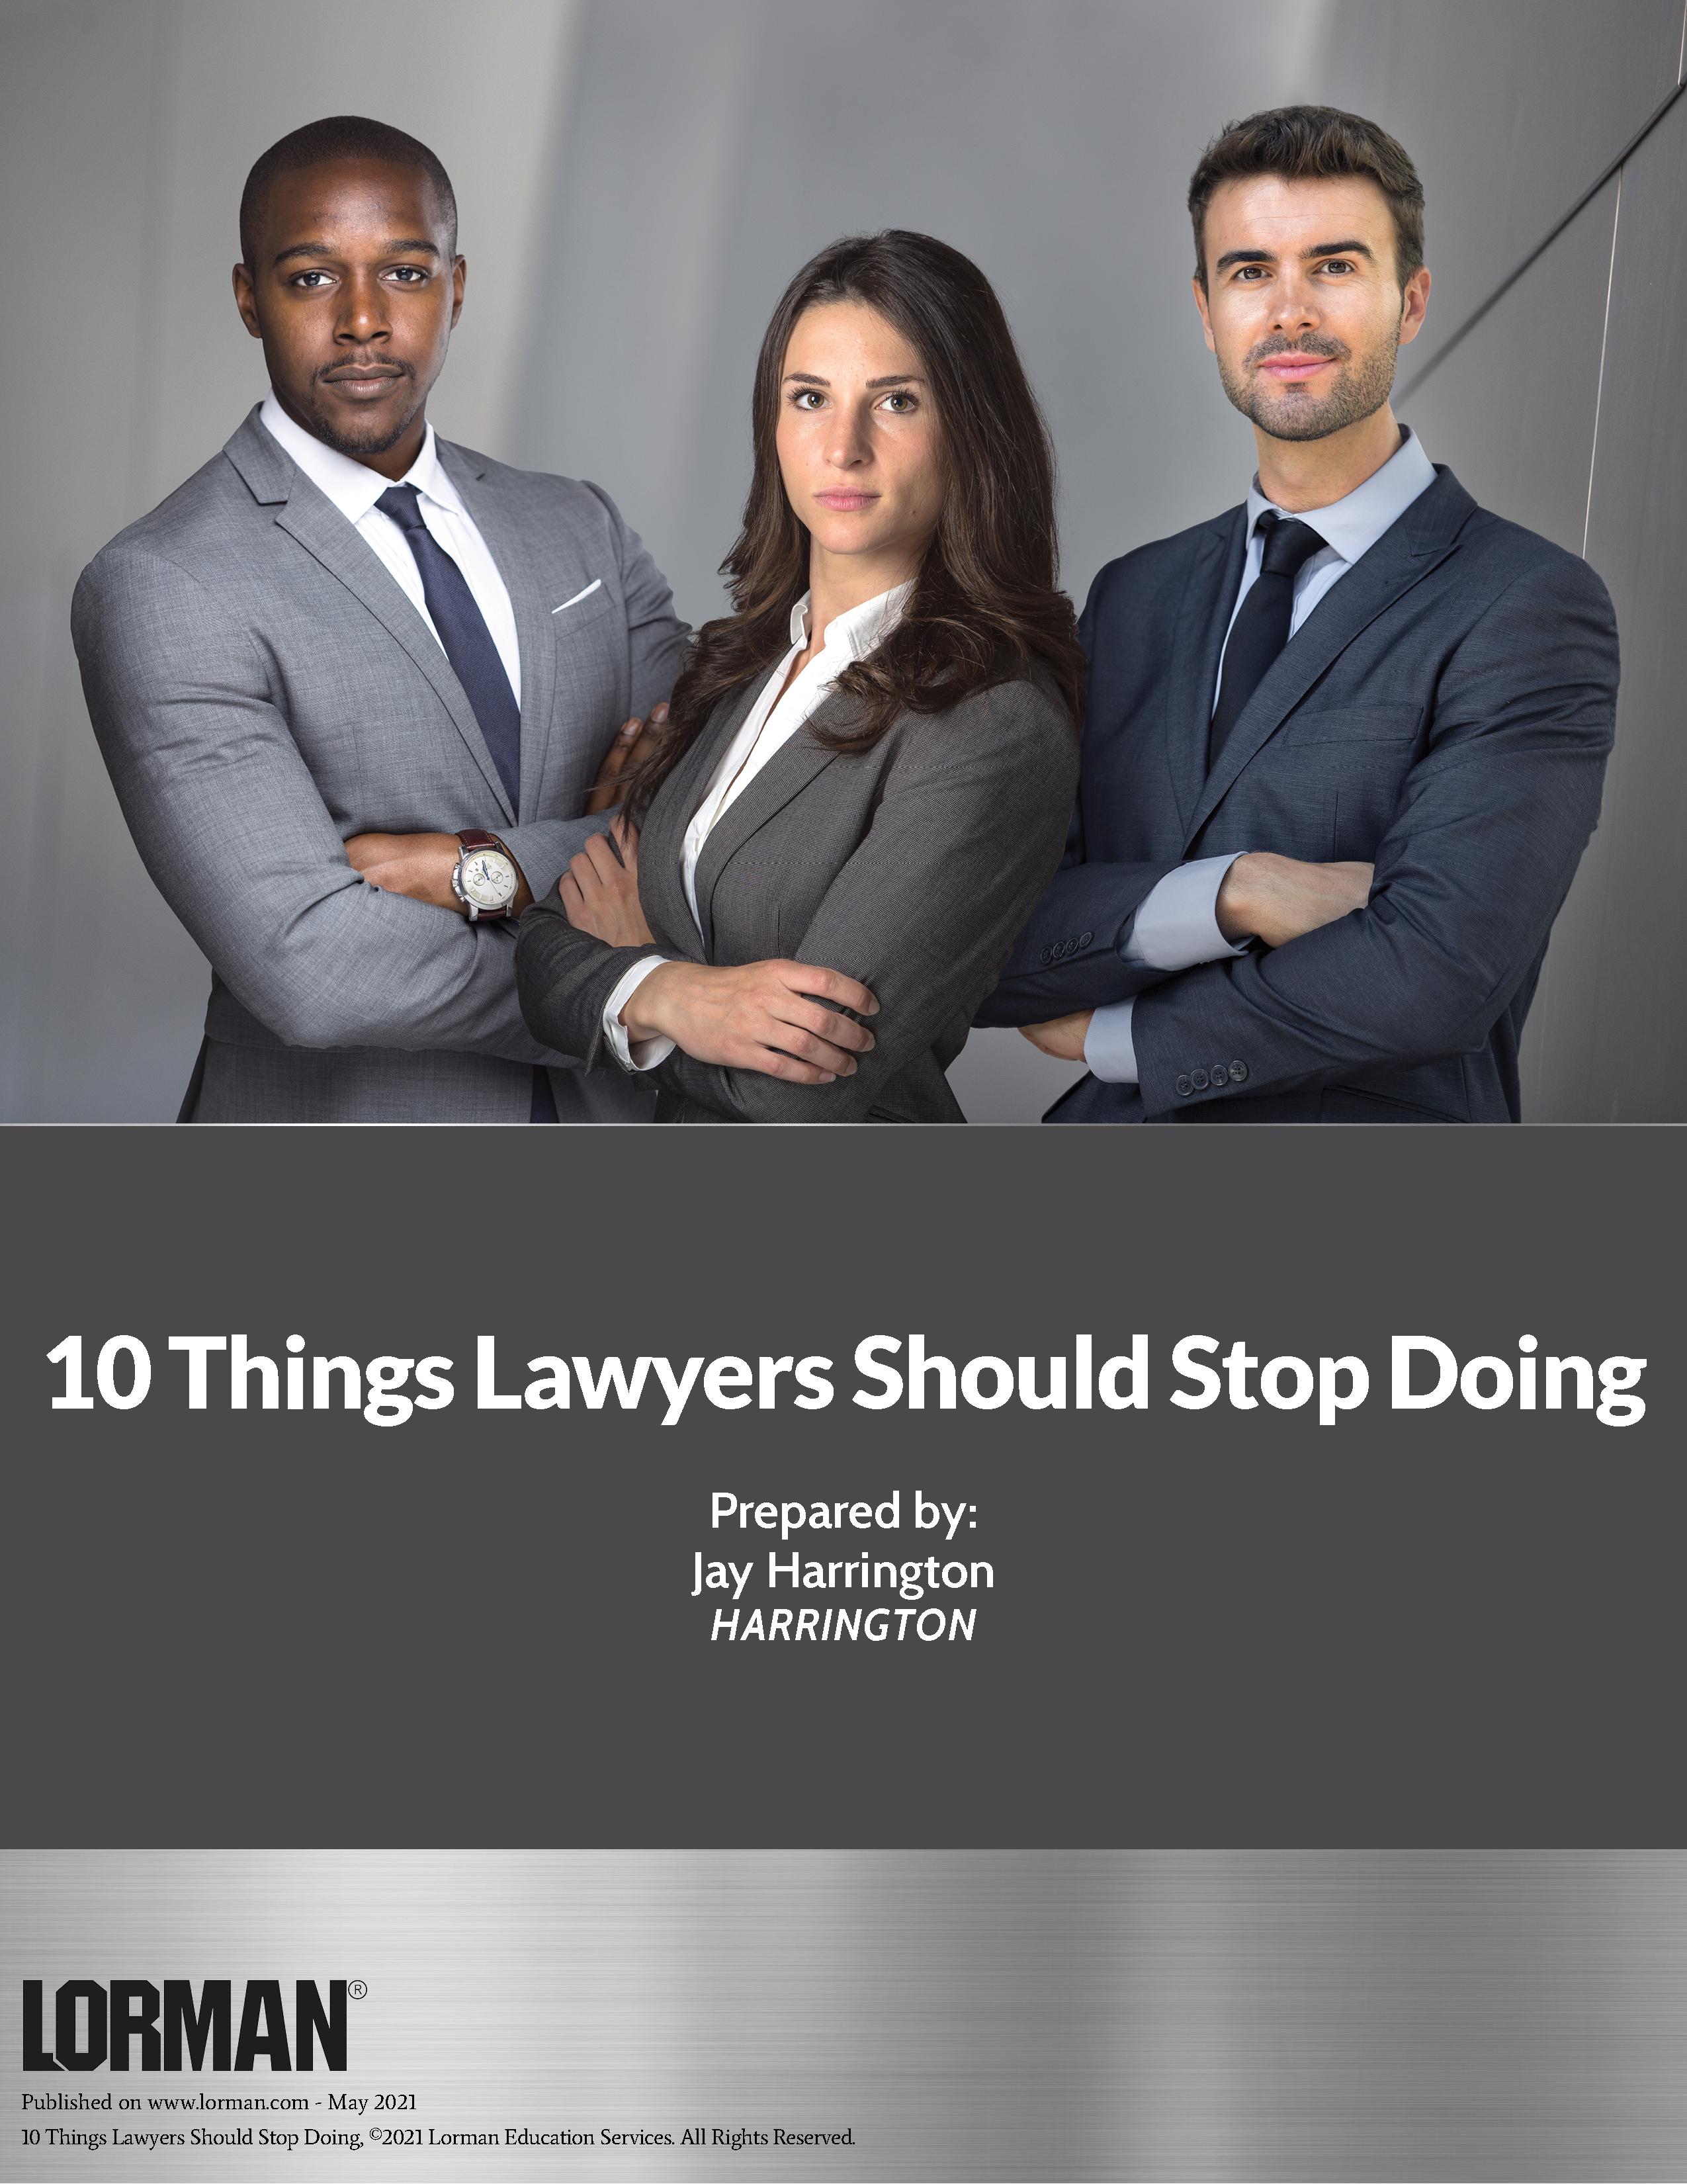 10 Things Lawyers Should Stop Doing